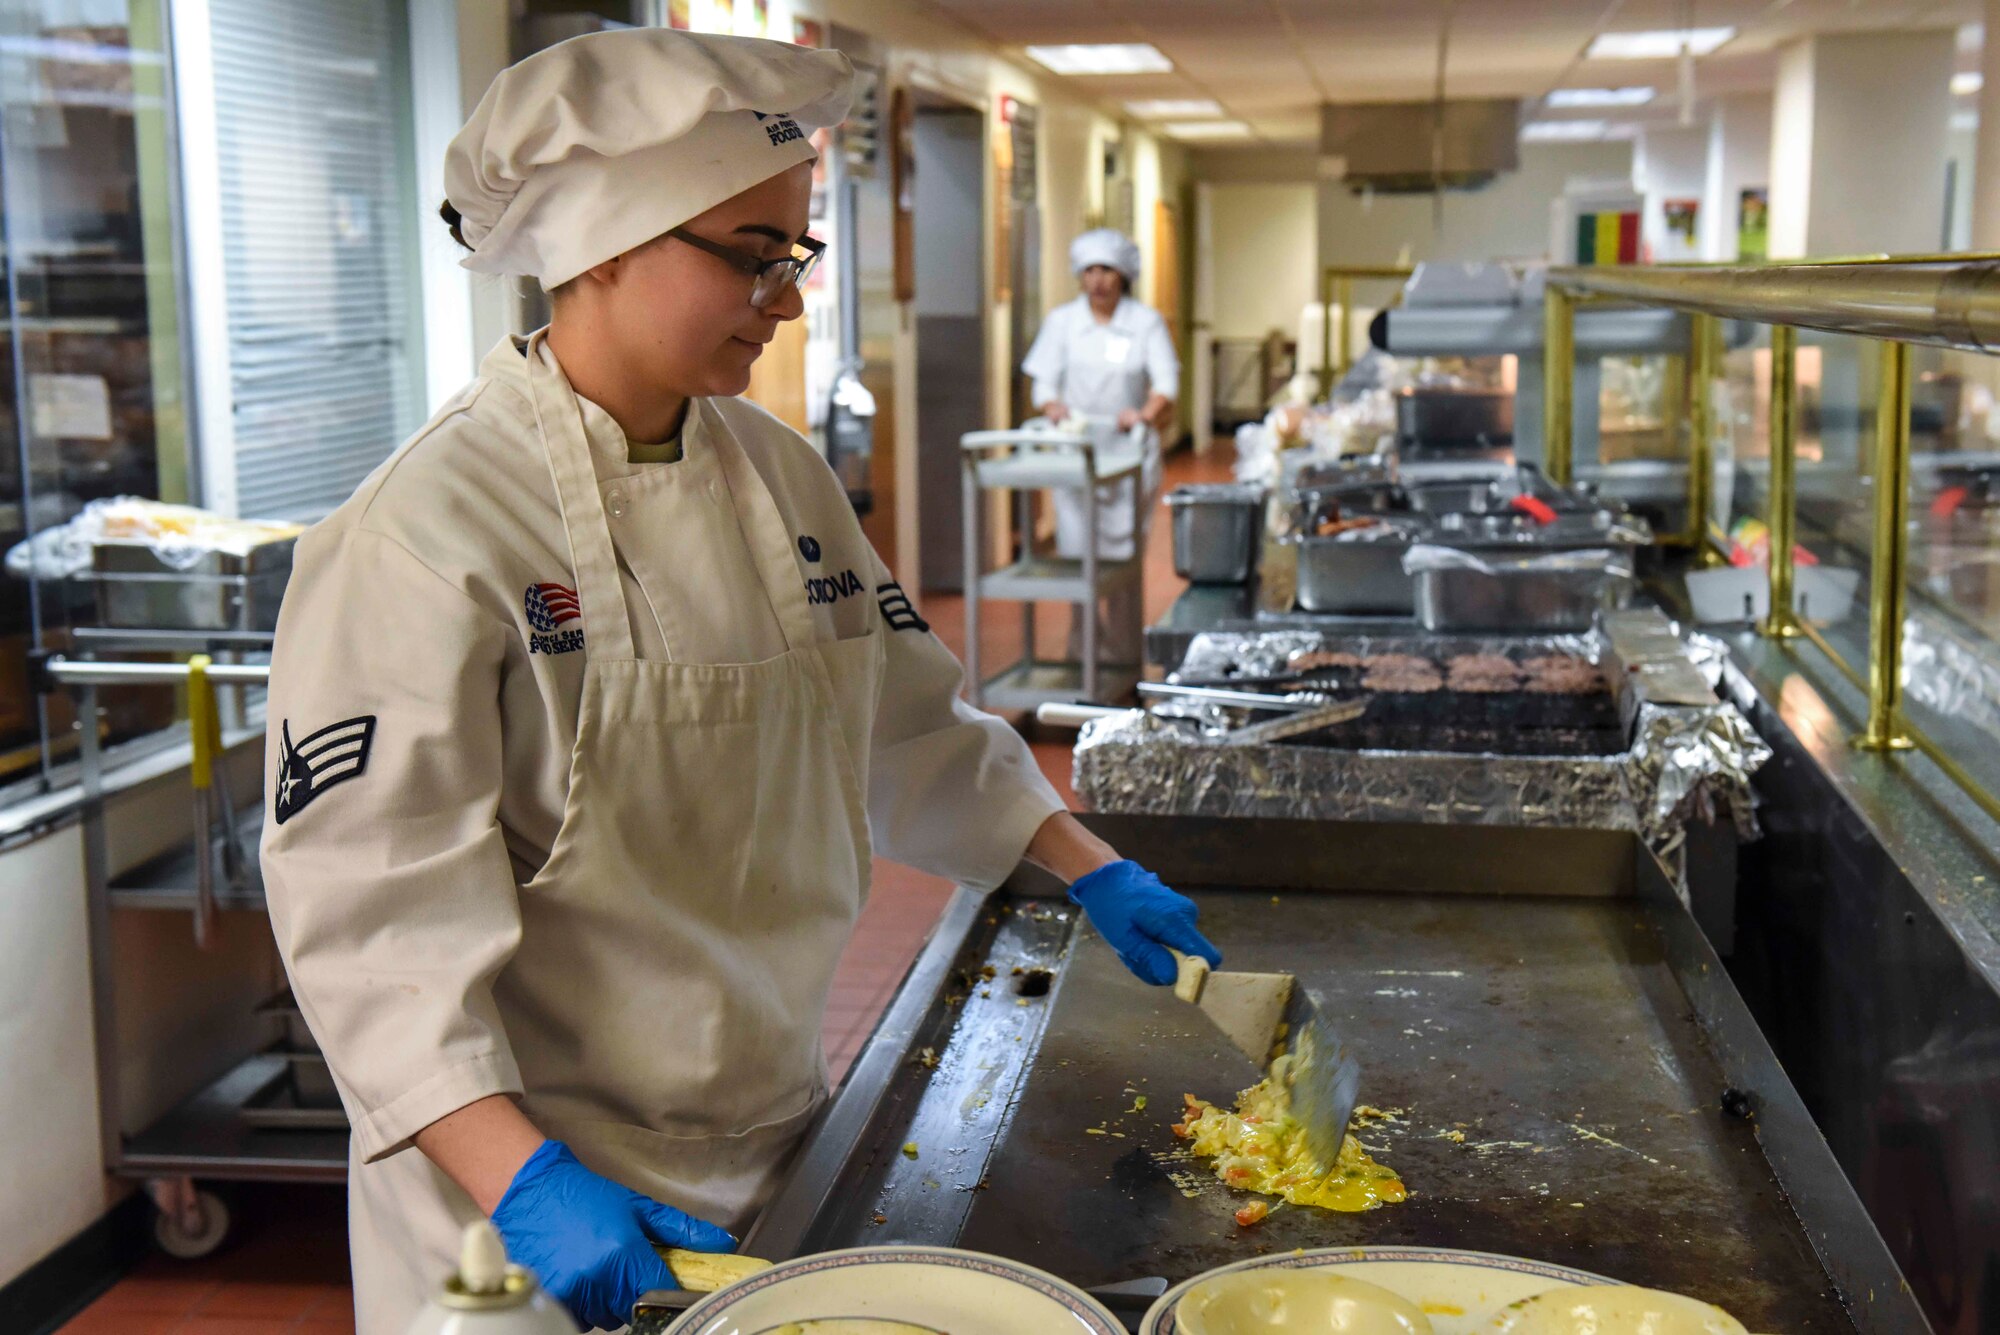 Senior Airman Autumn Cordova, a food services specialist in the 419th Sustainment Services Flight, cooks an omelet March 2, 2019, at the Hillcrest Dinning Facility on Hill Air Force Base, Utah.